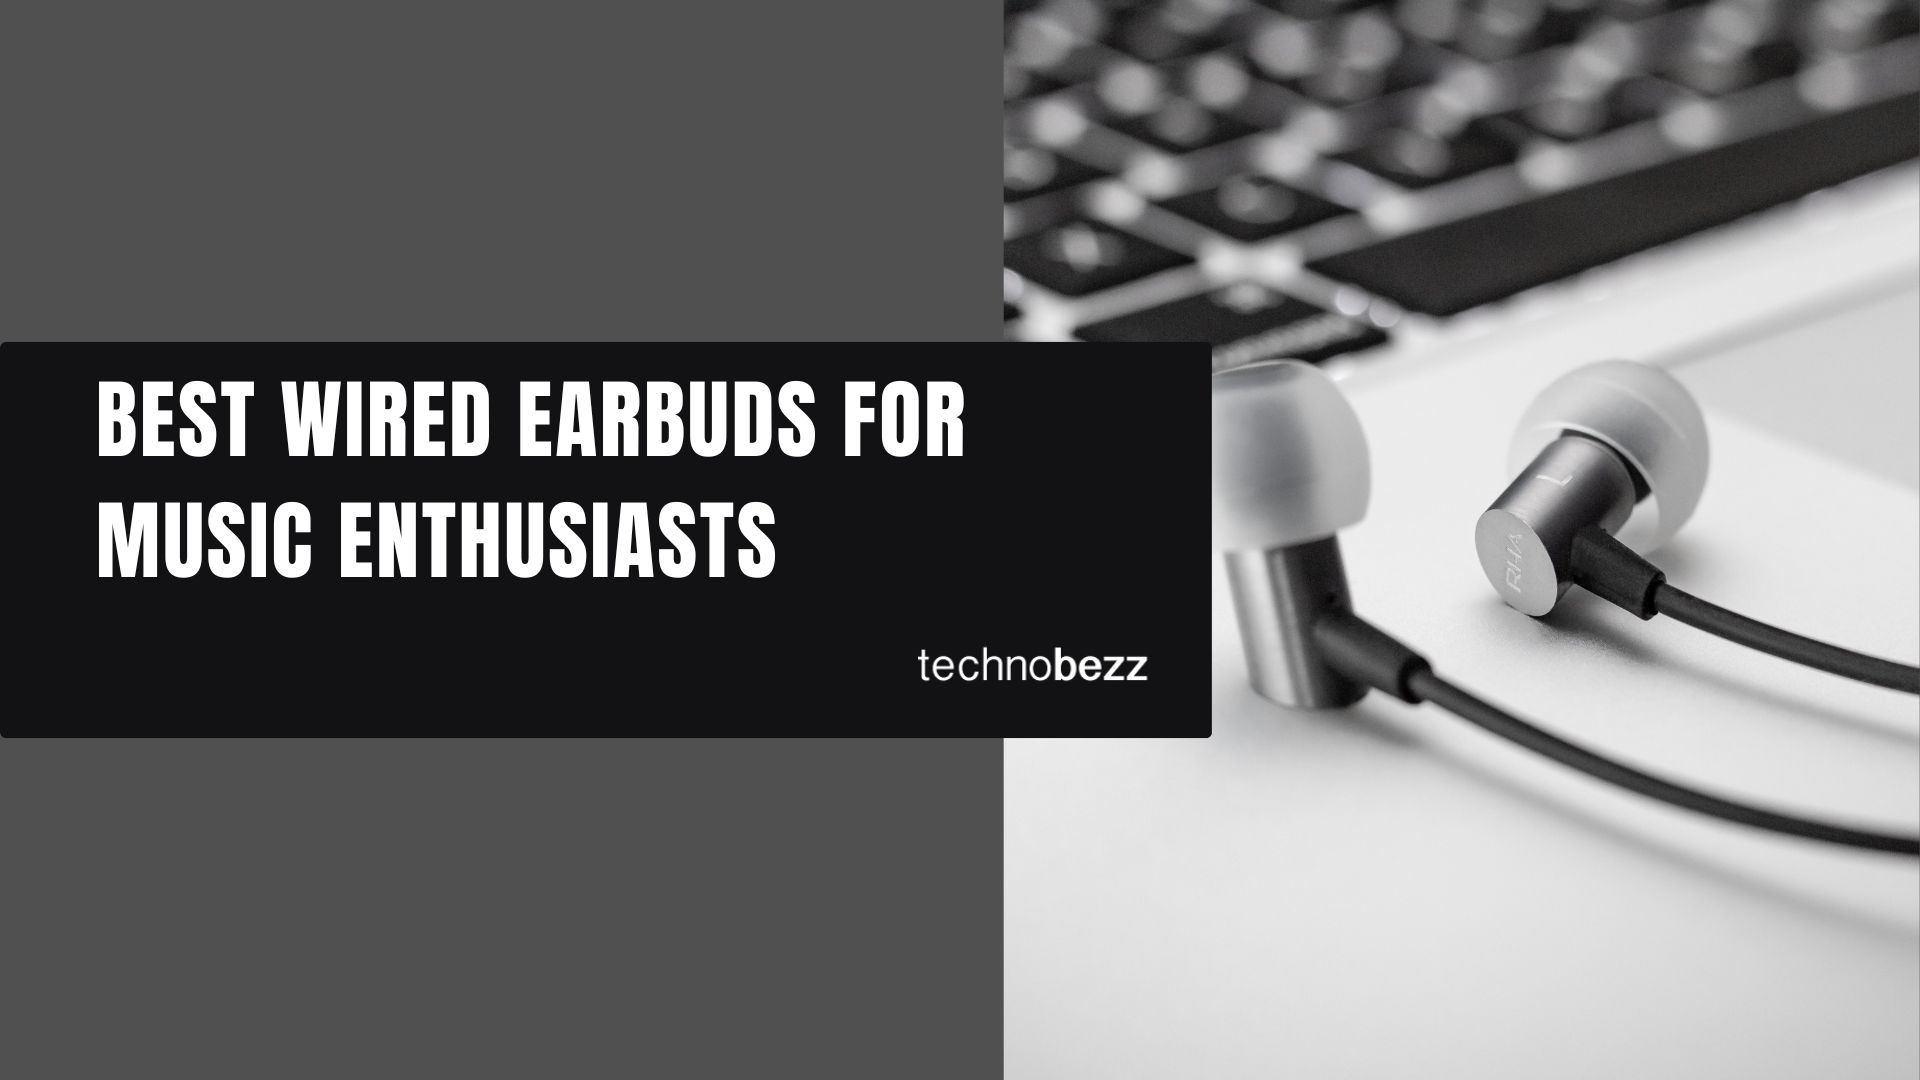 Best Wired Earbuds for Music Enthusiasts